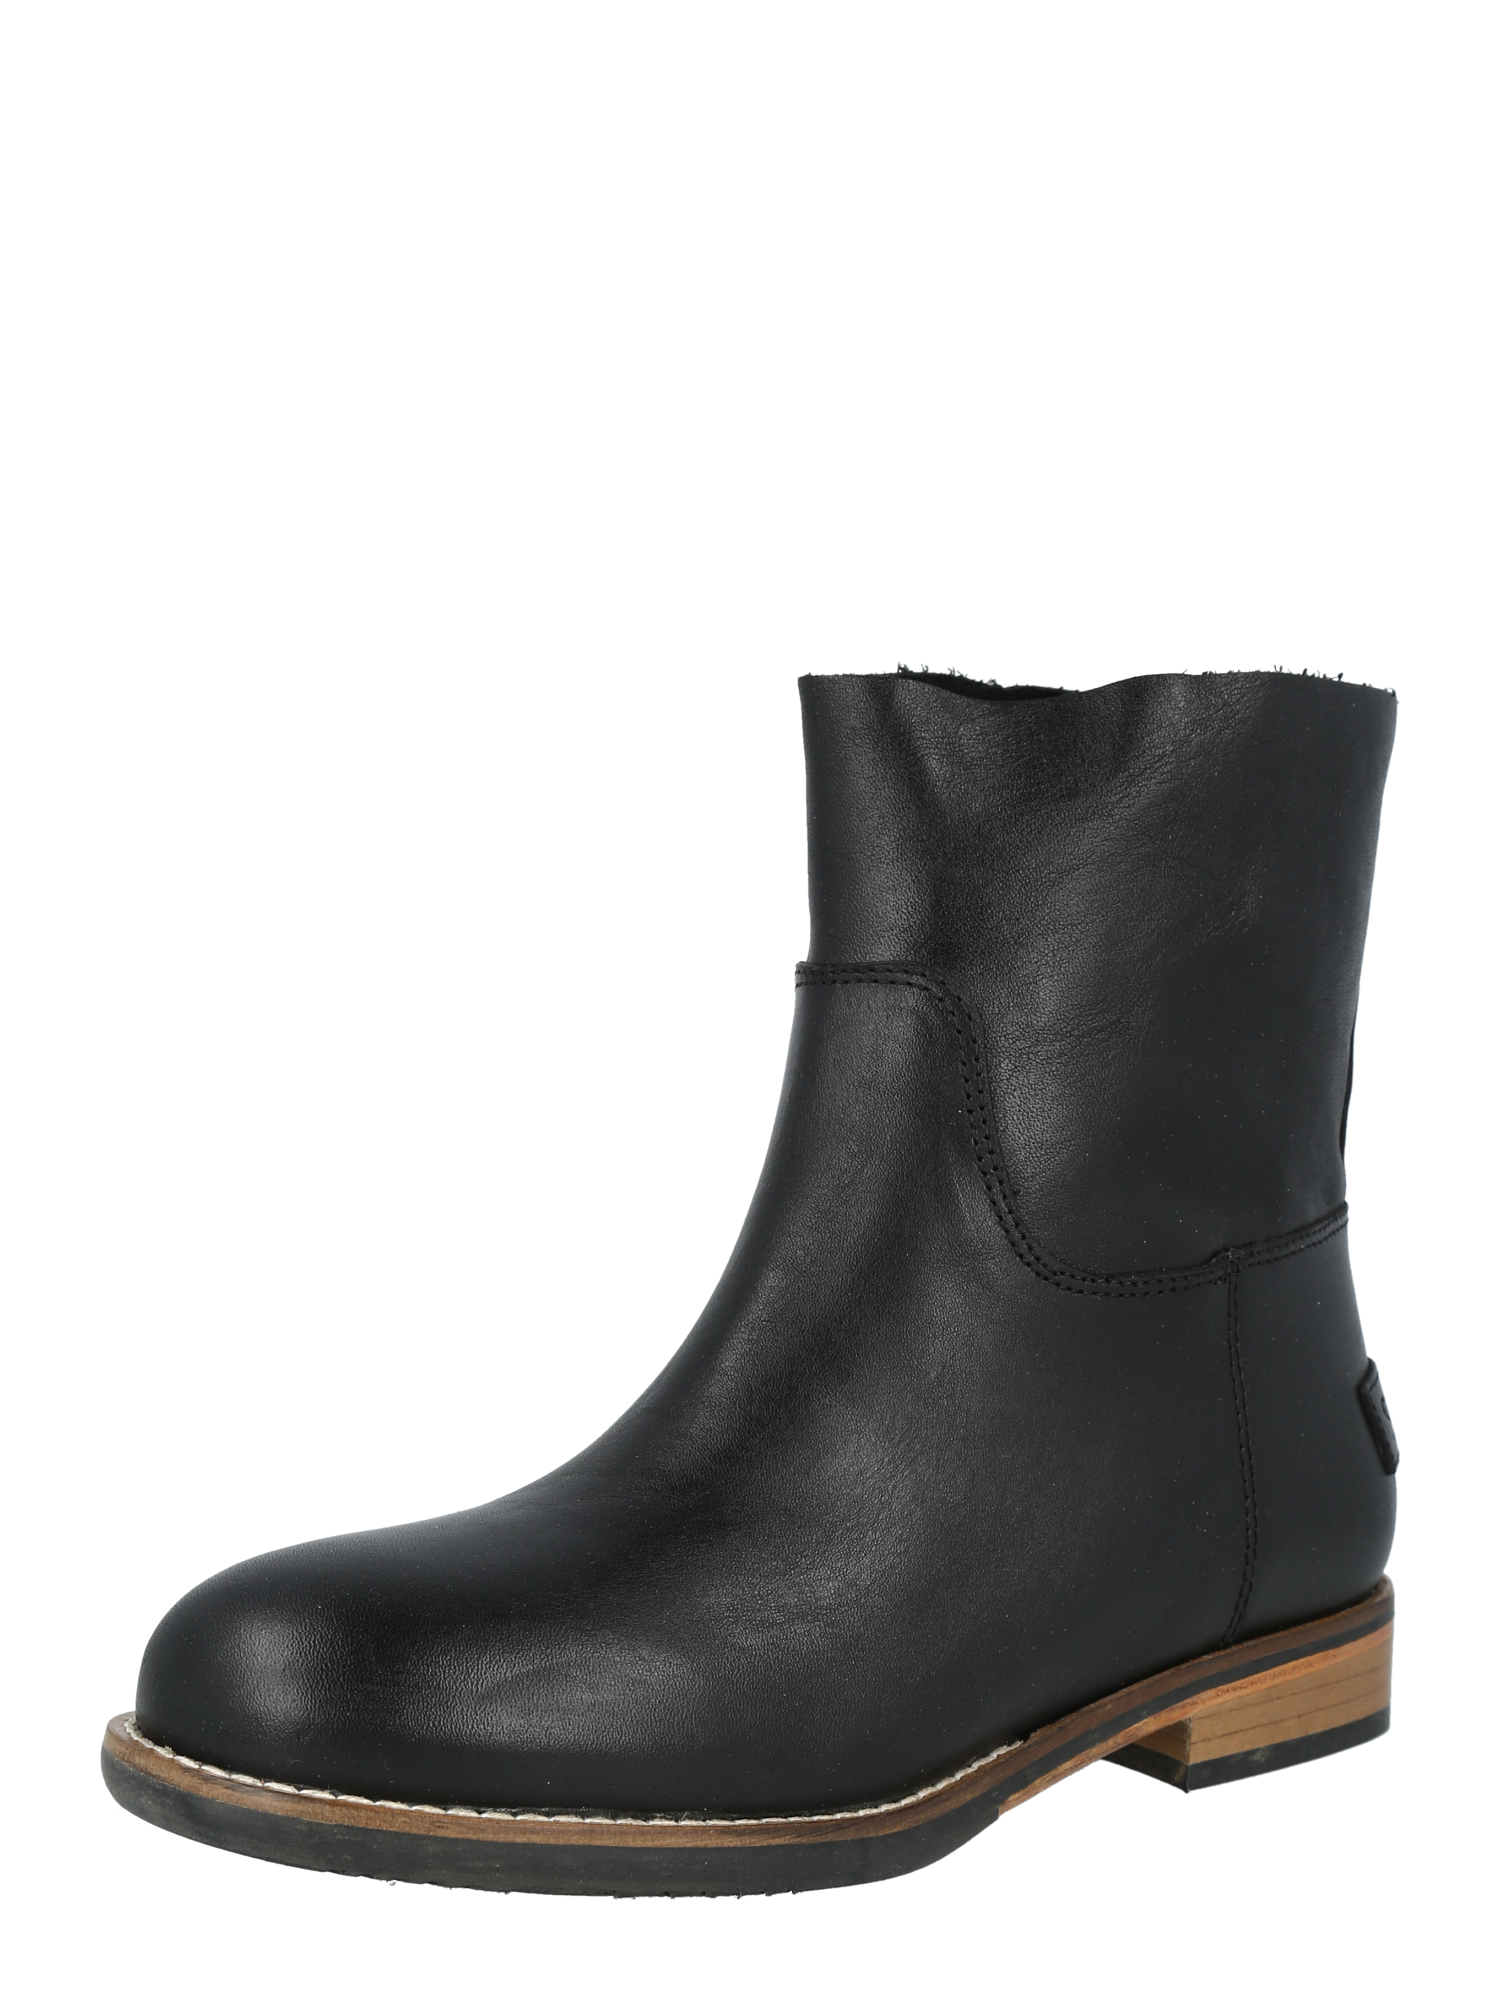 PROMO Donna SHABBIES AMSTERDAM Ankle boots in Nero 